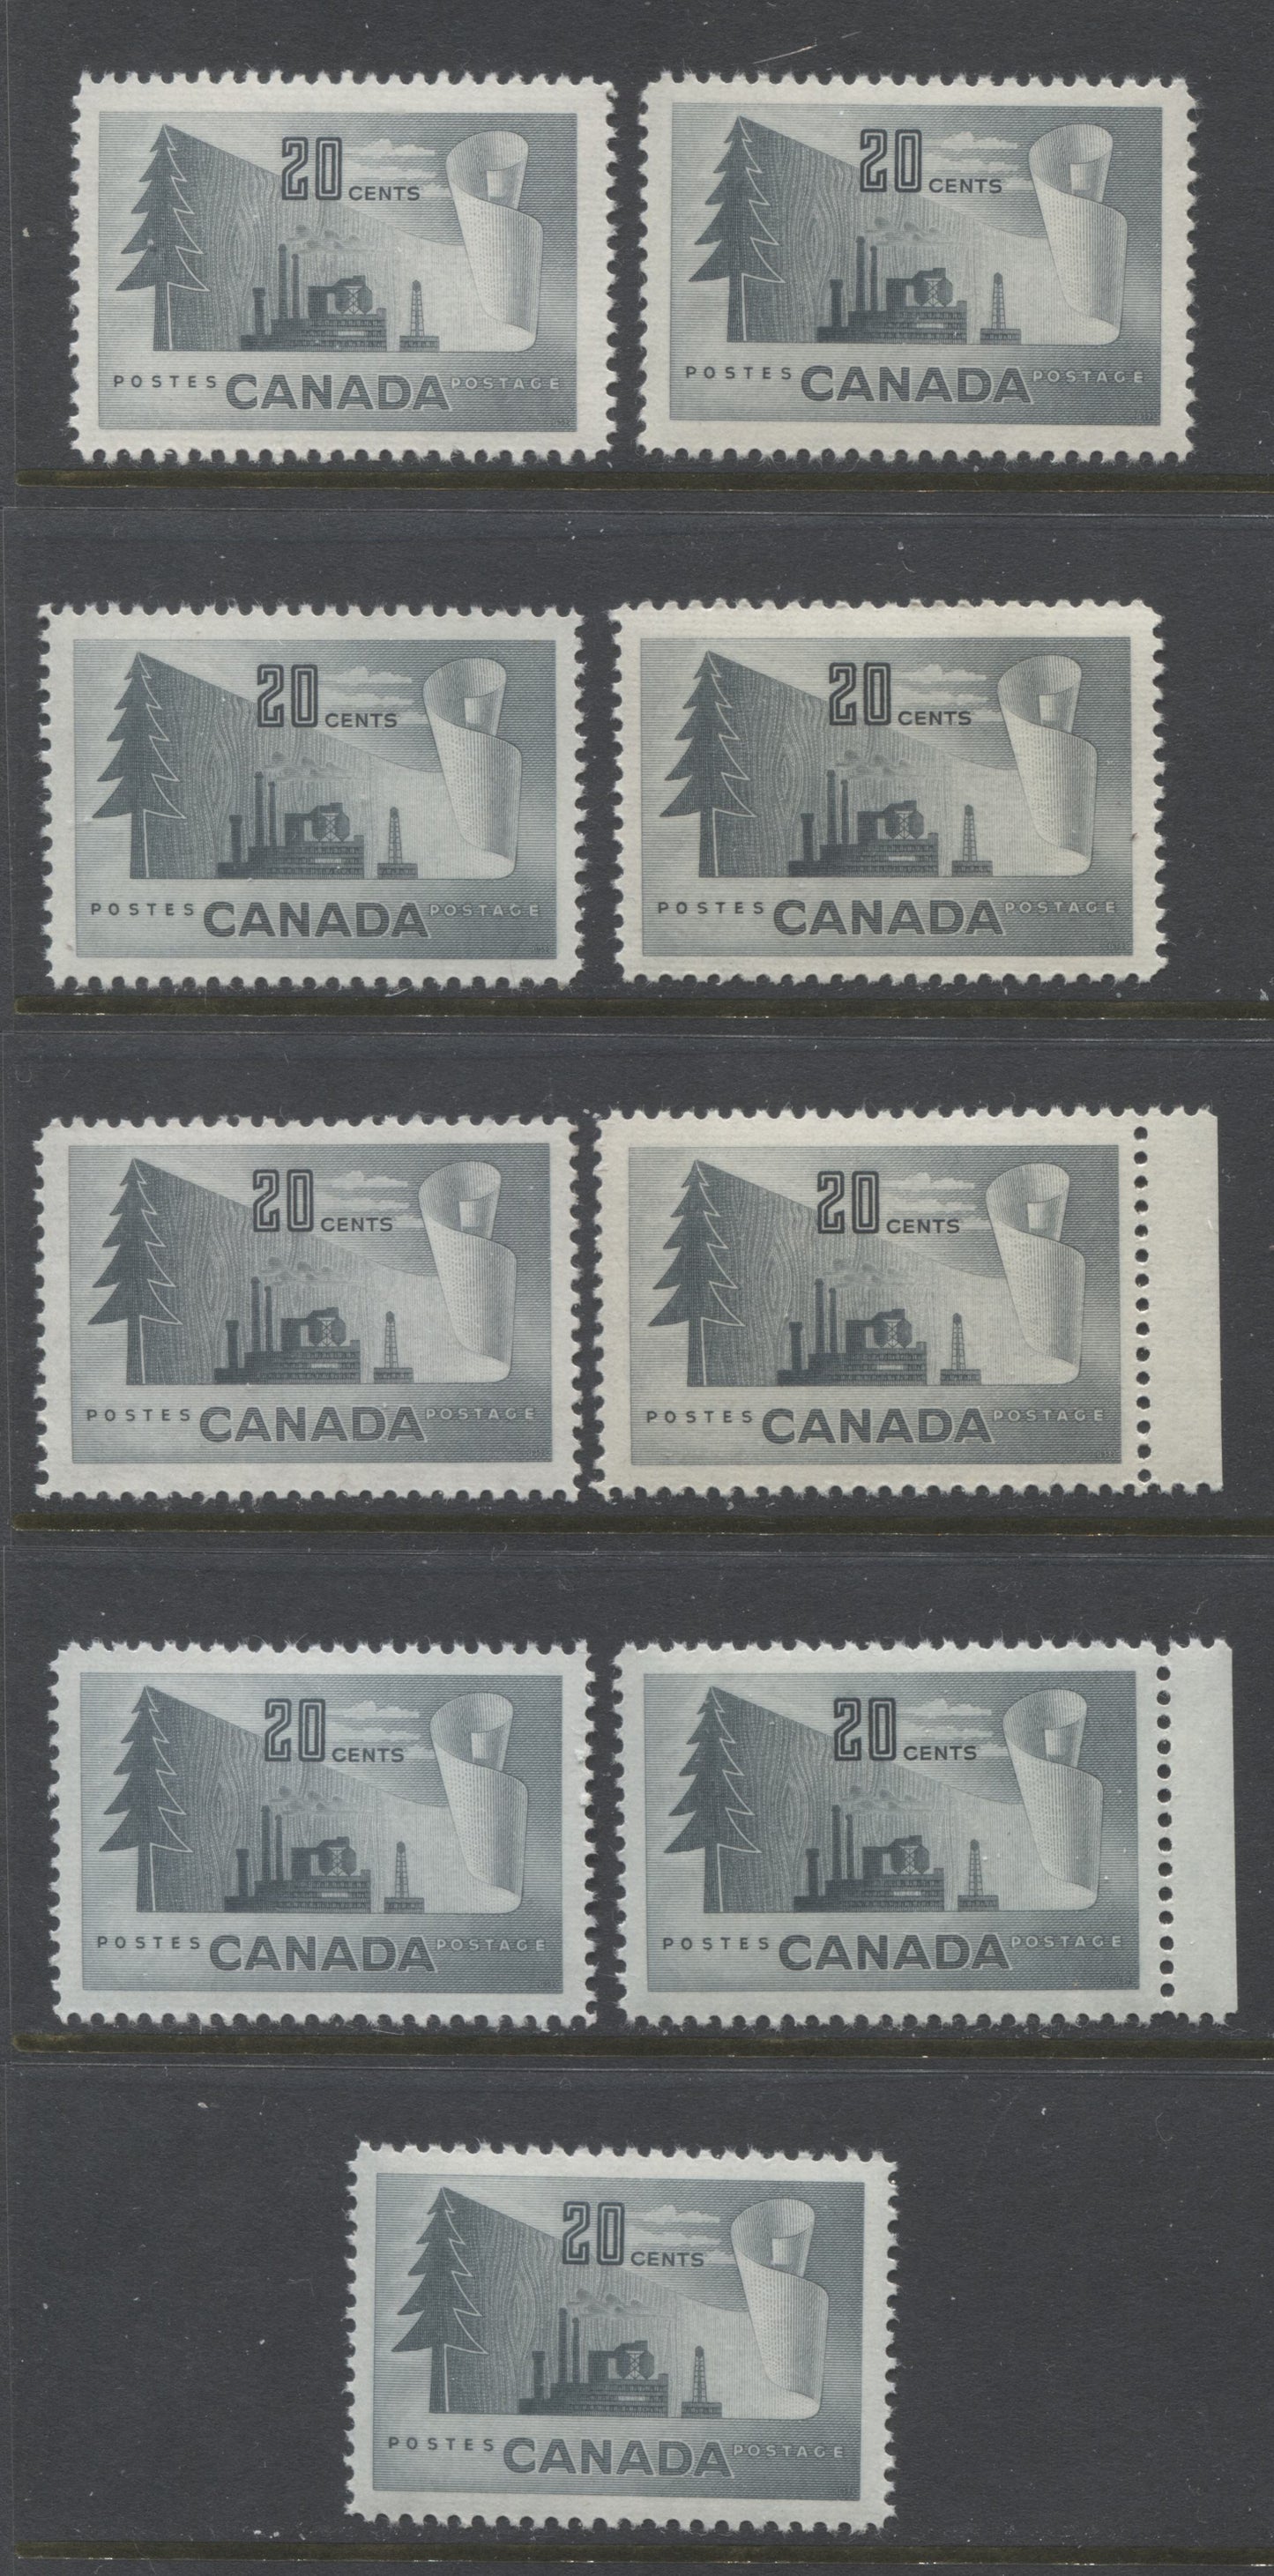 Lot 206 Canada #316 20c Slate Paper Mill, 1952-1956 Industry Definitives, 9 VFNH Singles, Horizontal Ribbed Paper, Various Shades & Gum Types, Various Perfs